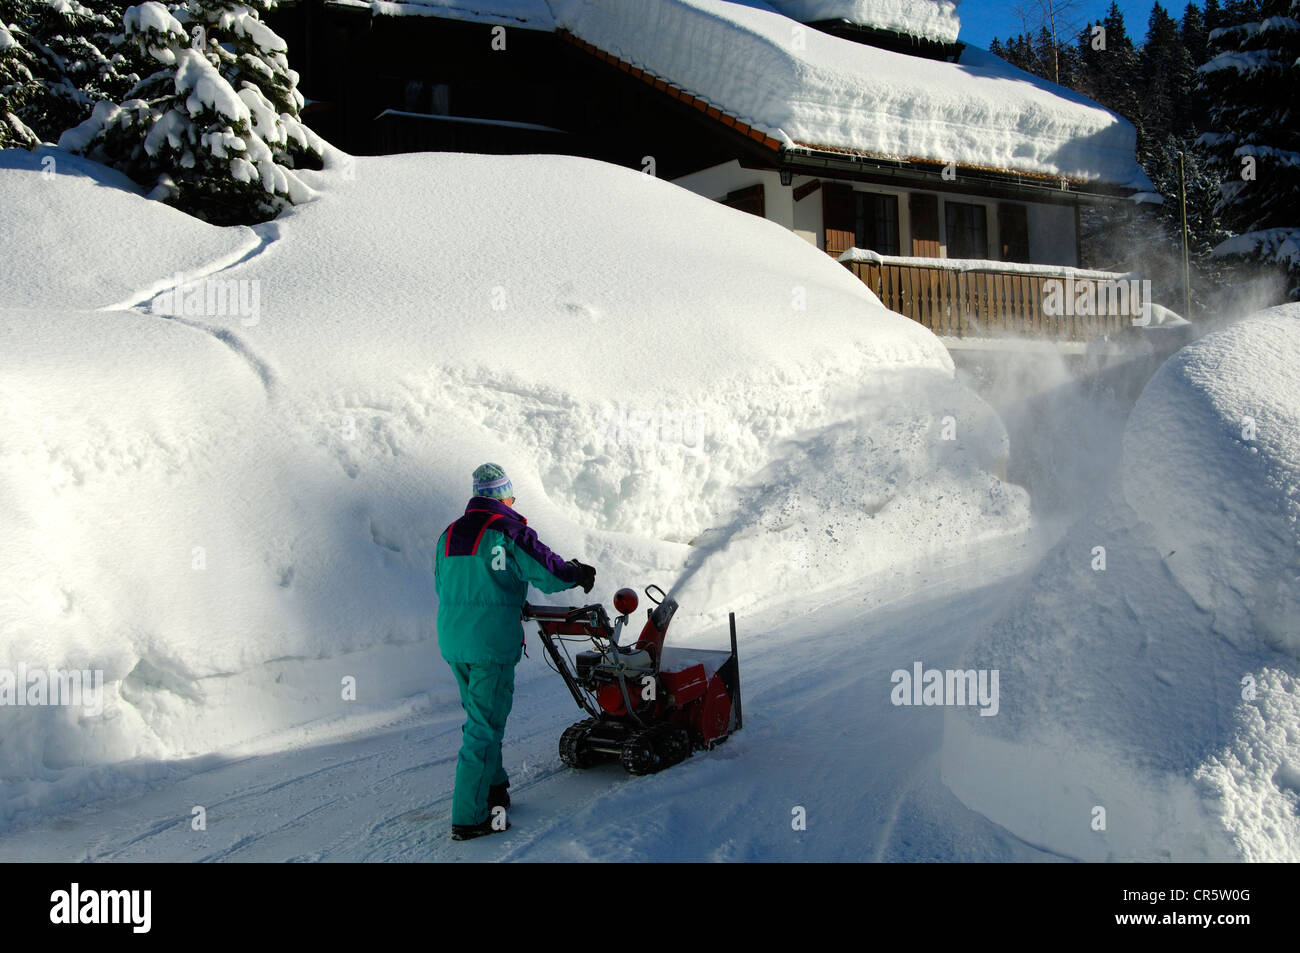 Man clearing snow with a hand snow blower in front of his snow-covered house, Givrine, St. Cergue, Jura, Switzerland, Europe Stock Photo